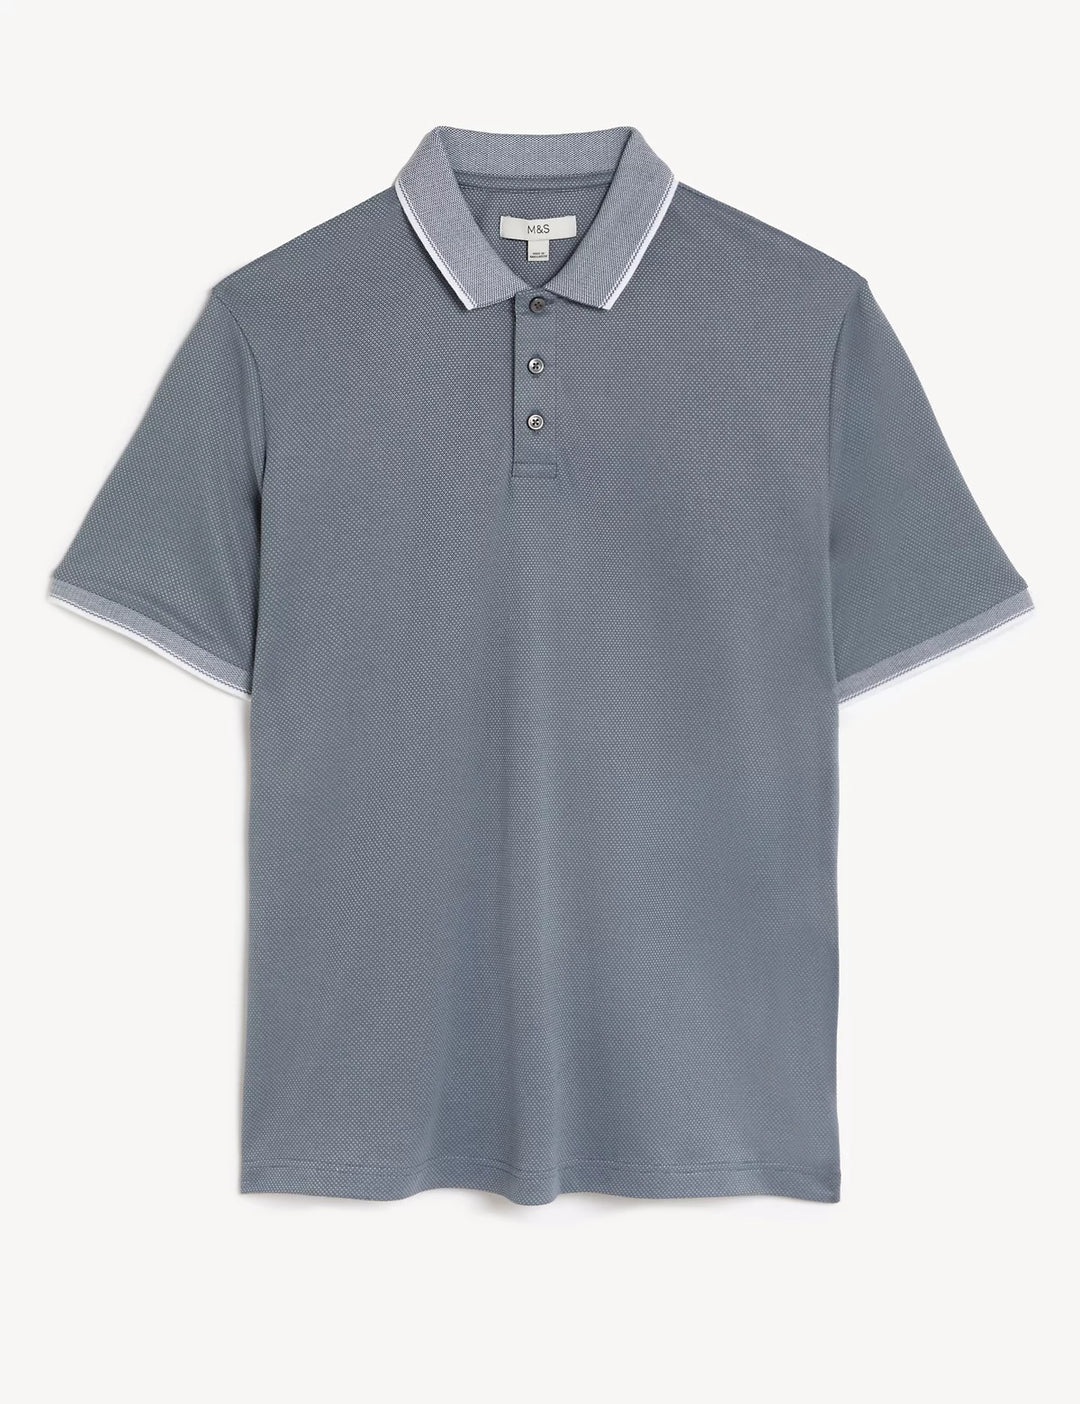 M&S Mens S/S Polo T28/3376M